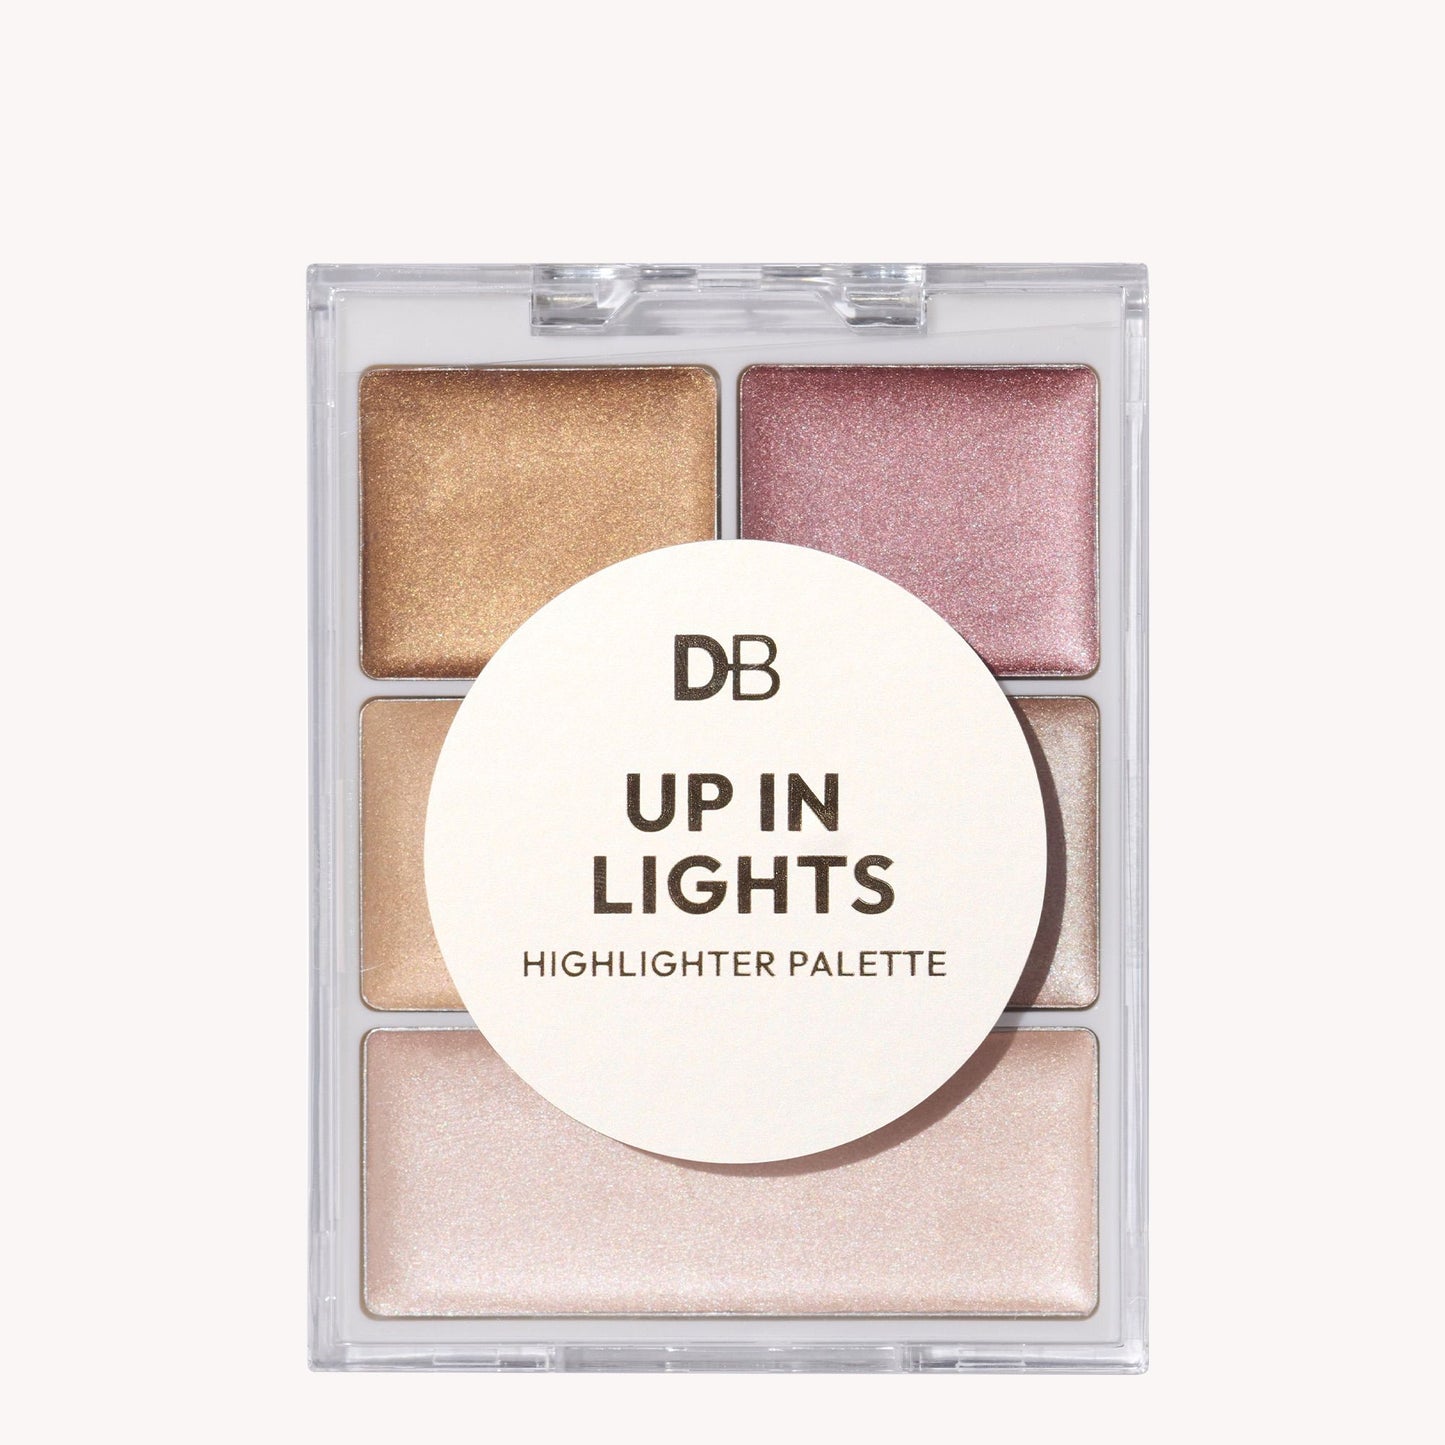 Up In Lights Highlighter Palette | DB Cosmetics | Closed